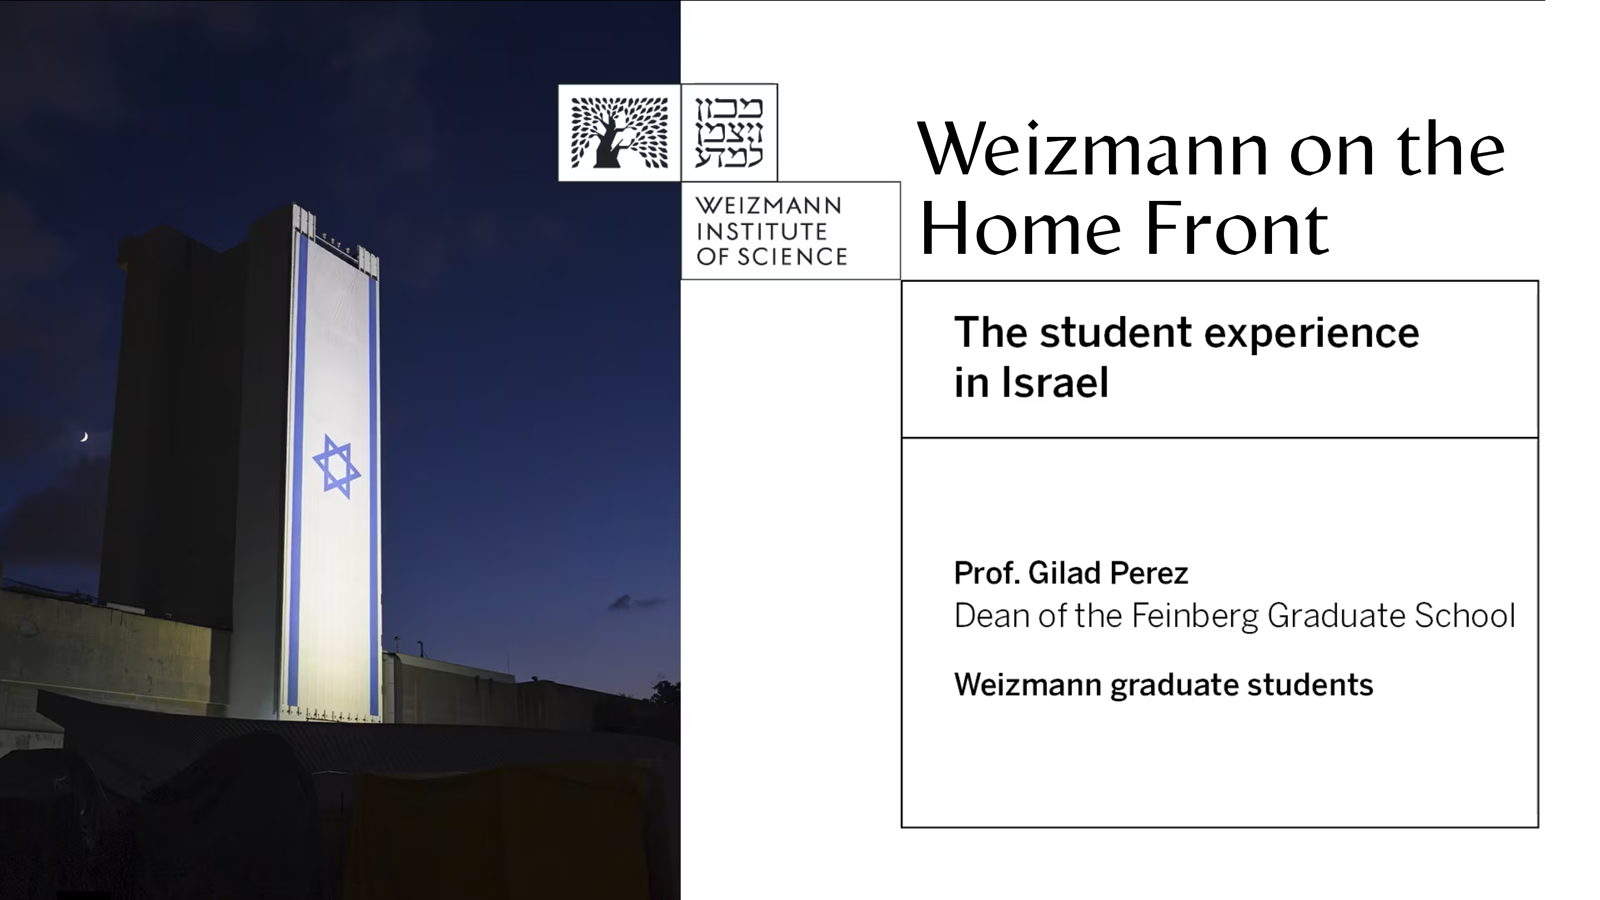 Weizmann on the Homefront: The Student Experience in Israel